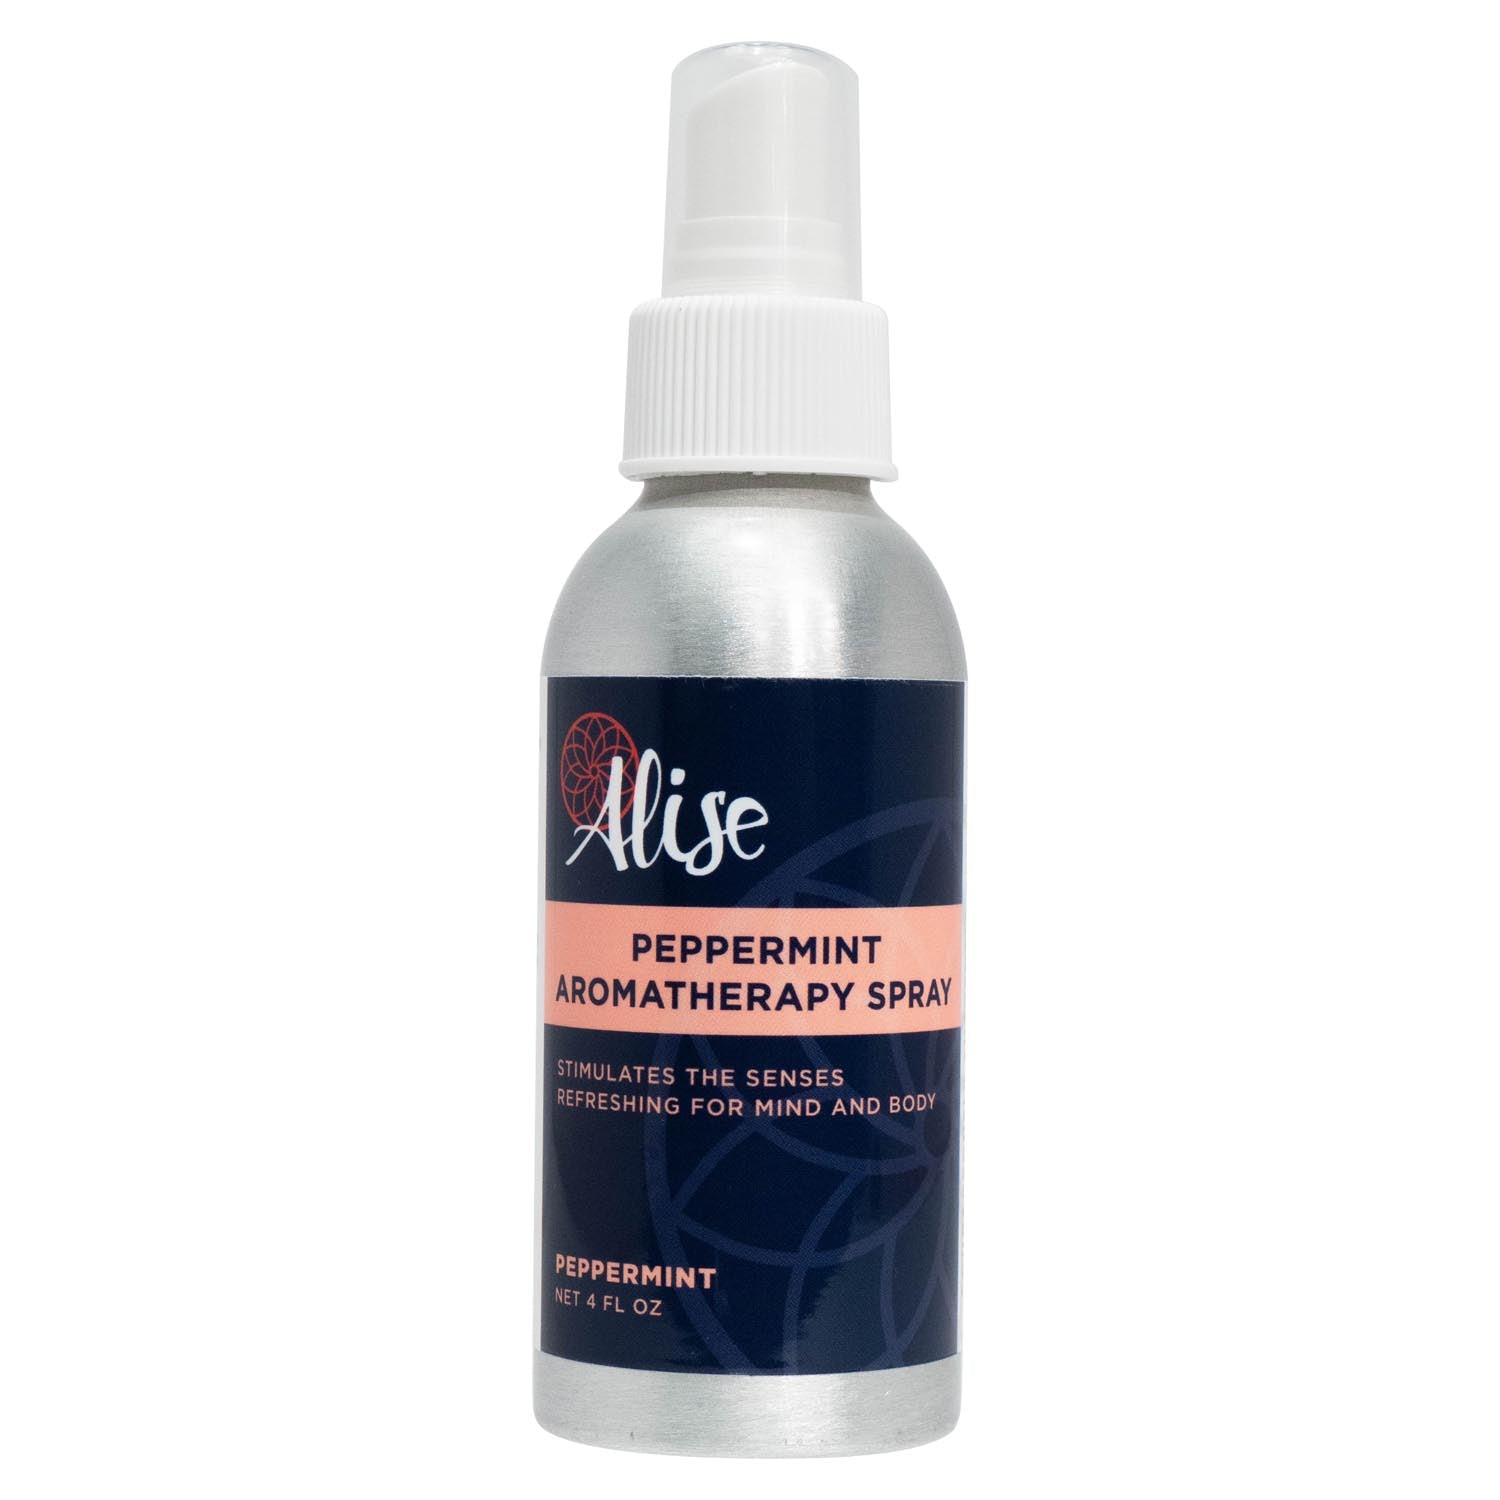 Peppermint Aromatherapy Spray 4oz handcrafted by Alise Body Care